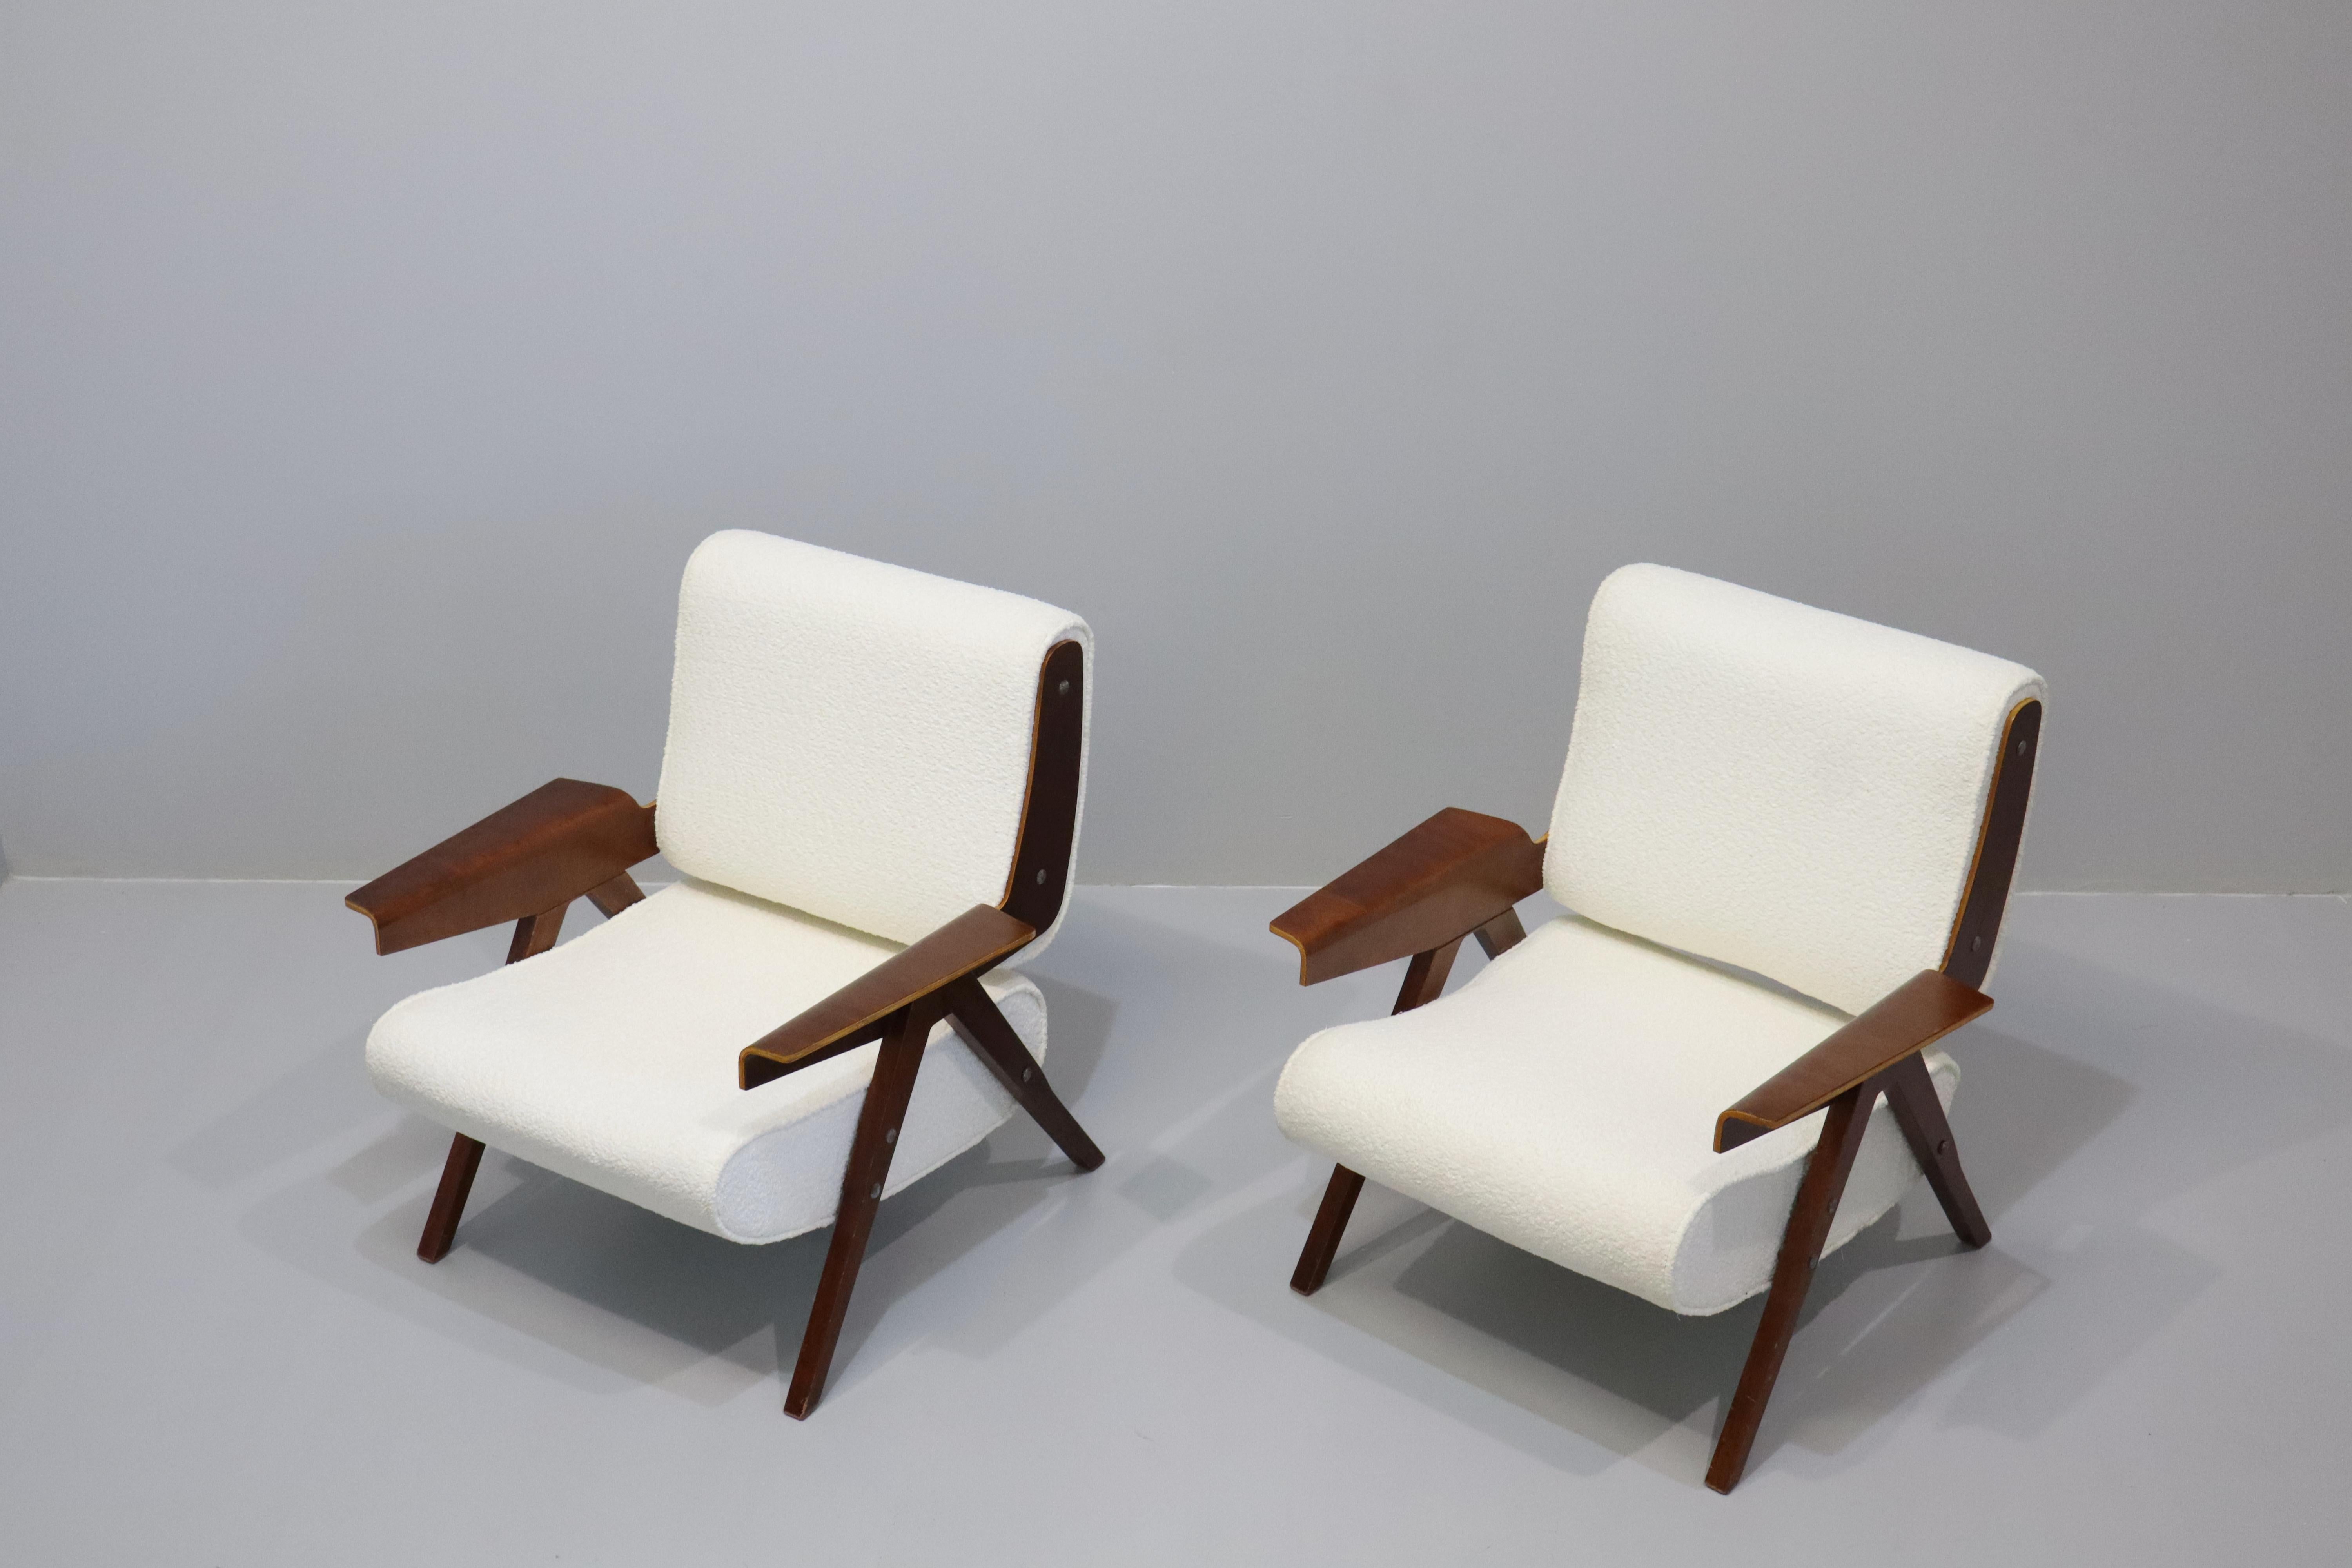 Pair Of Gianfranco Frattini Model 831 Lounge Chairs For Cassina, 1950s For Sale 5